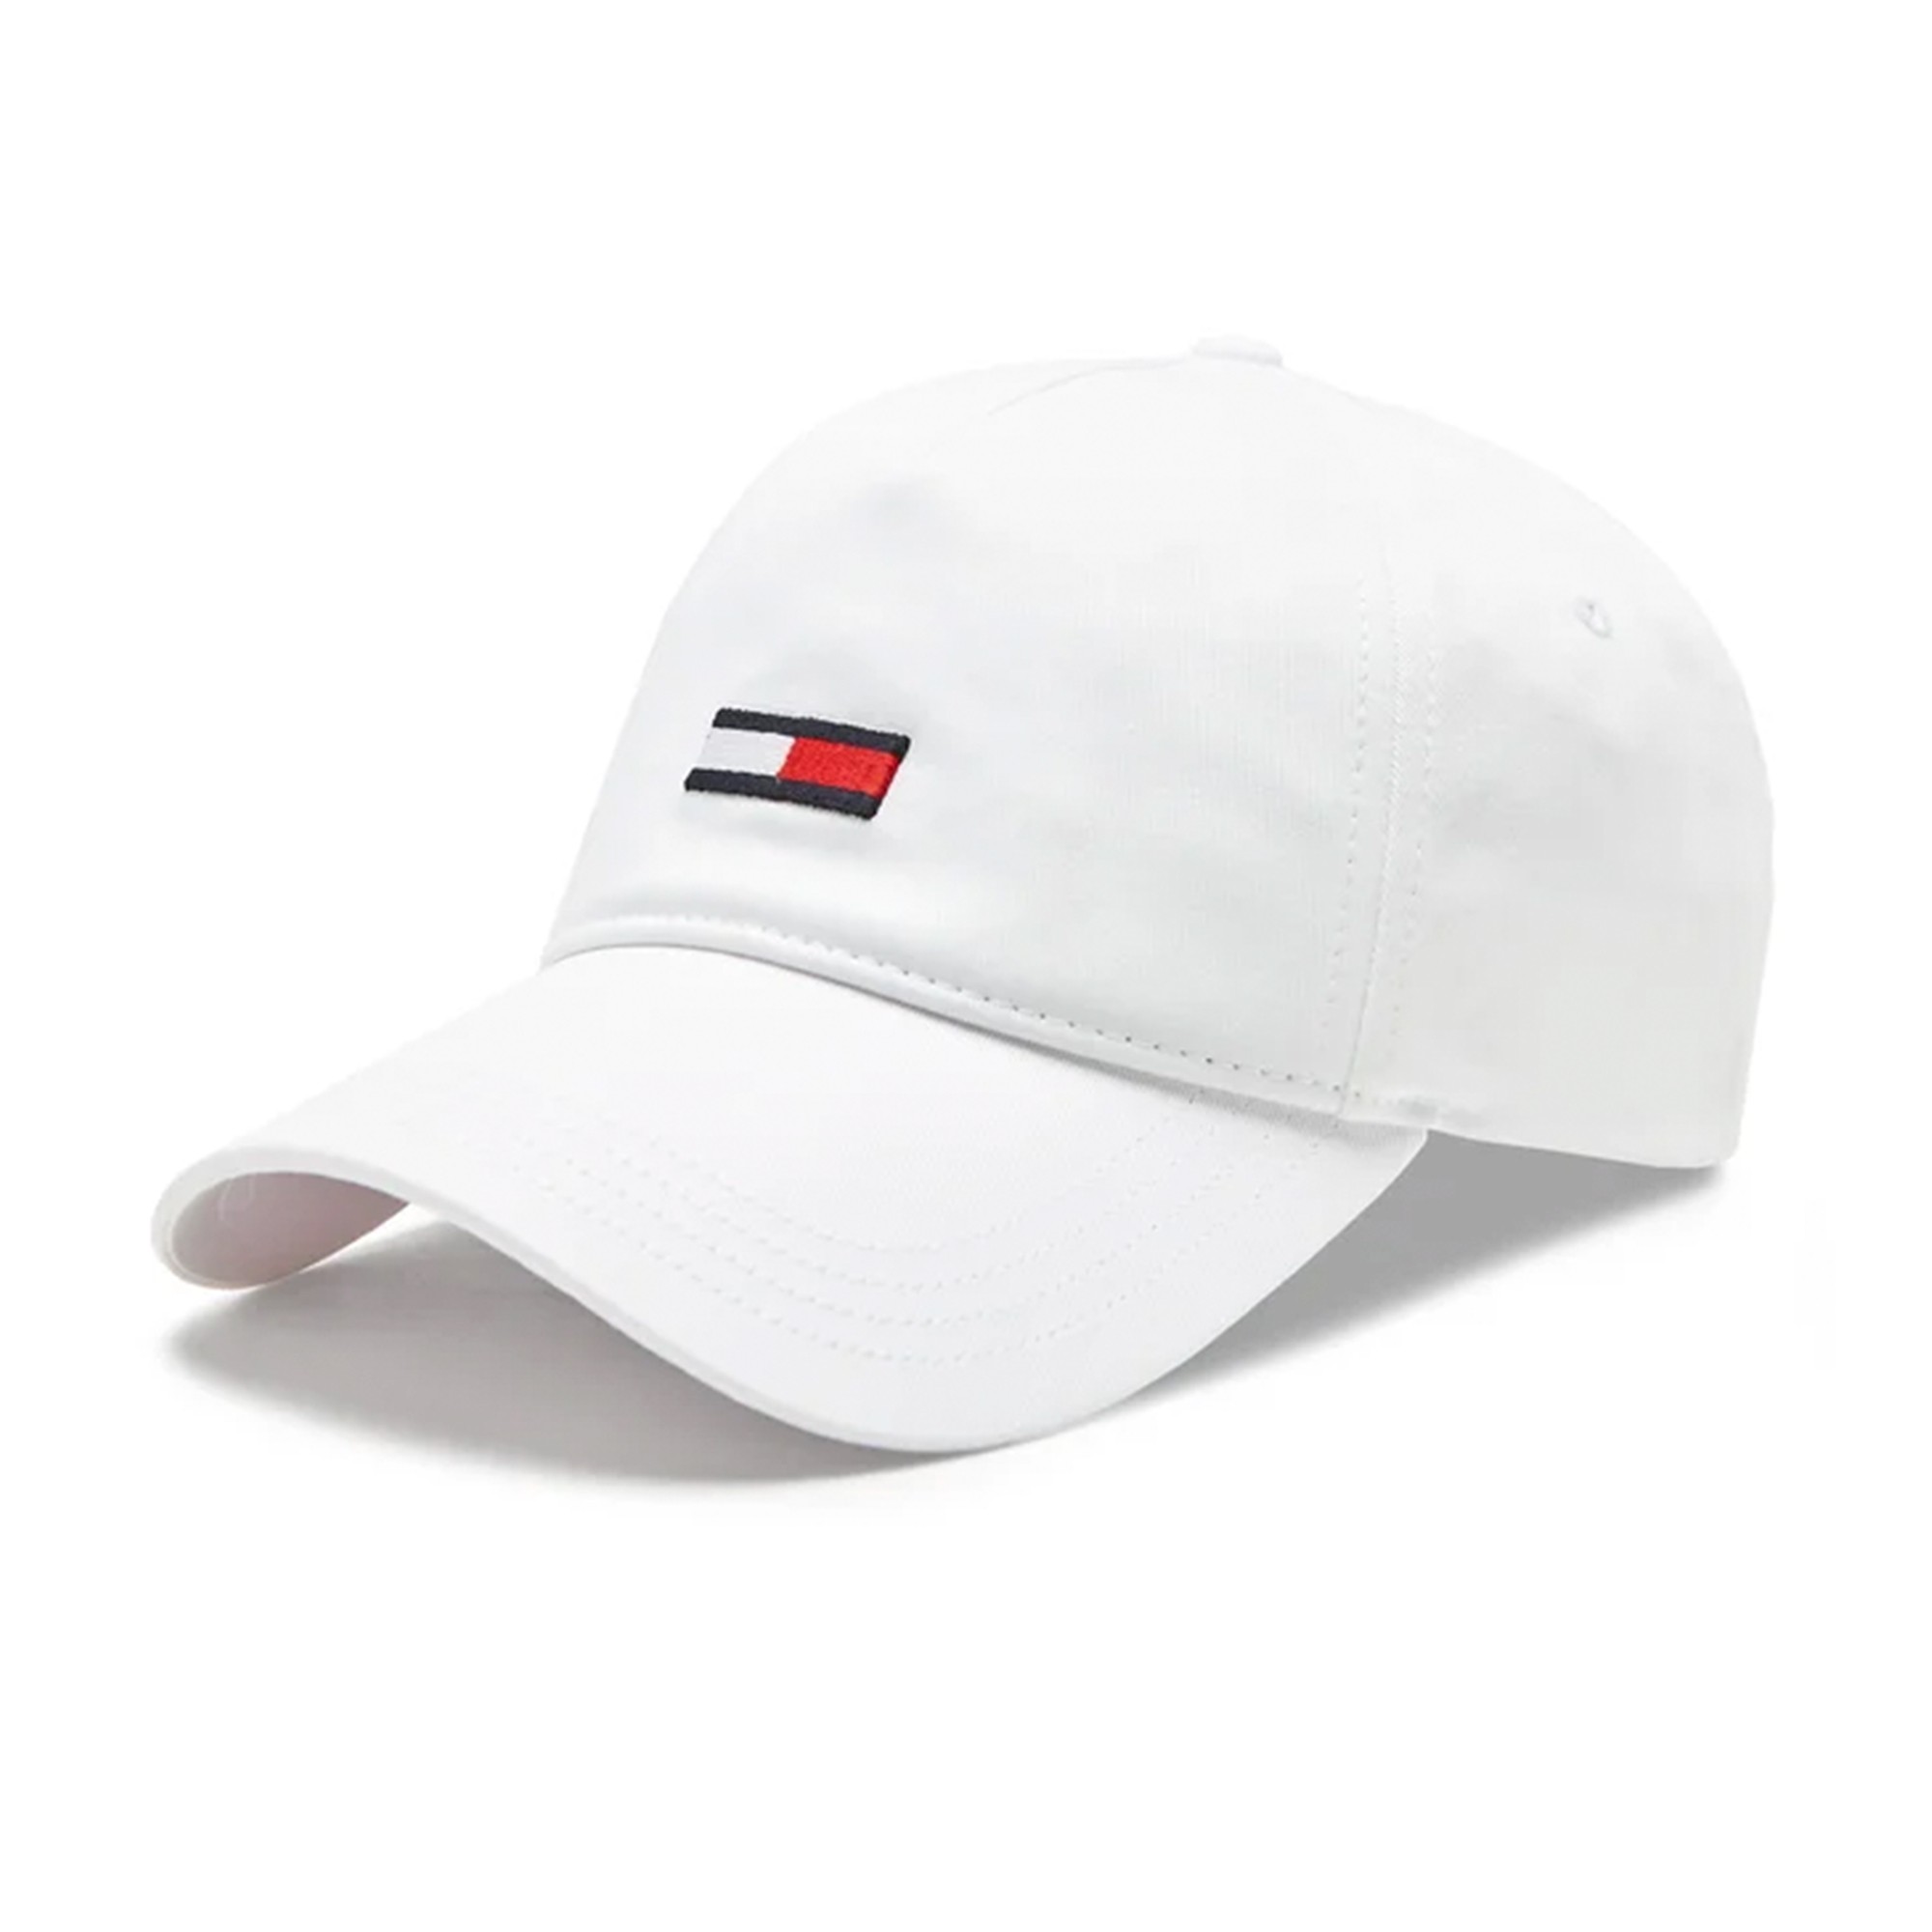 WHITE YBR Caps HILFIGER AW0AW14986 visors TOMMY and